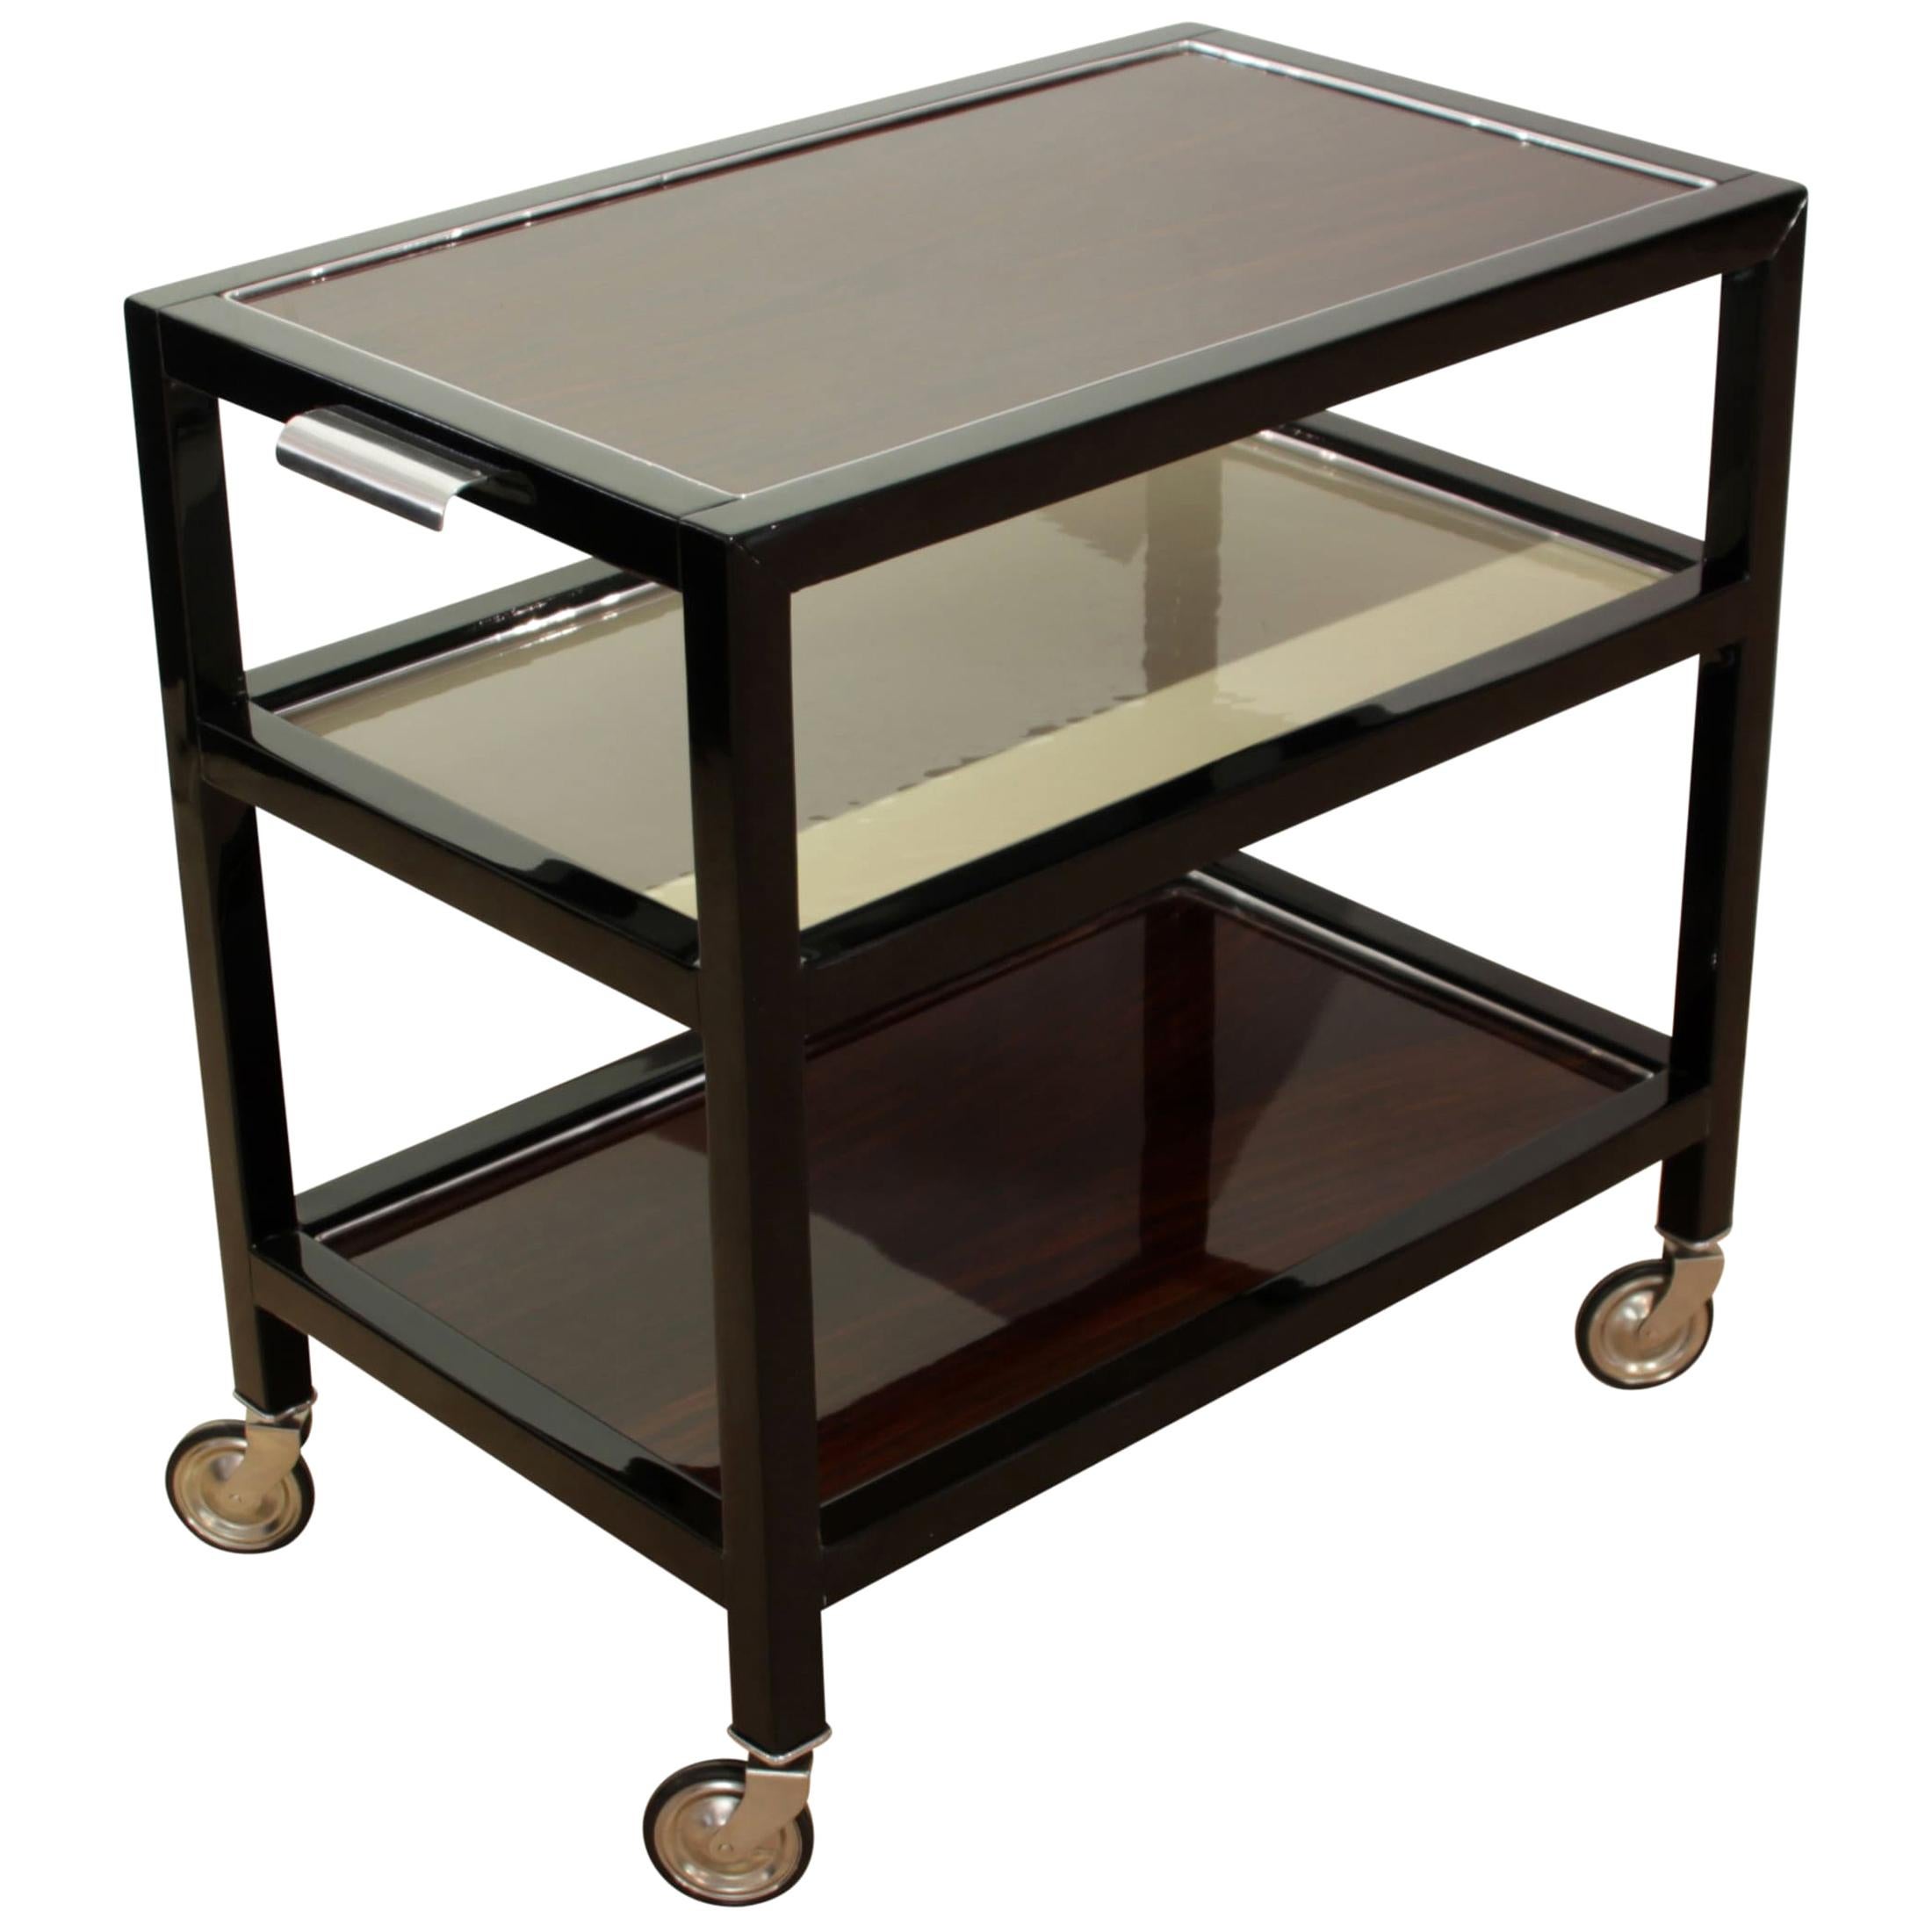 Art Deco Serving Table, Rosewood and Black Lacquer, France, circa 1940